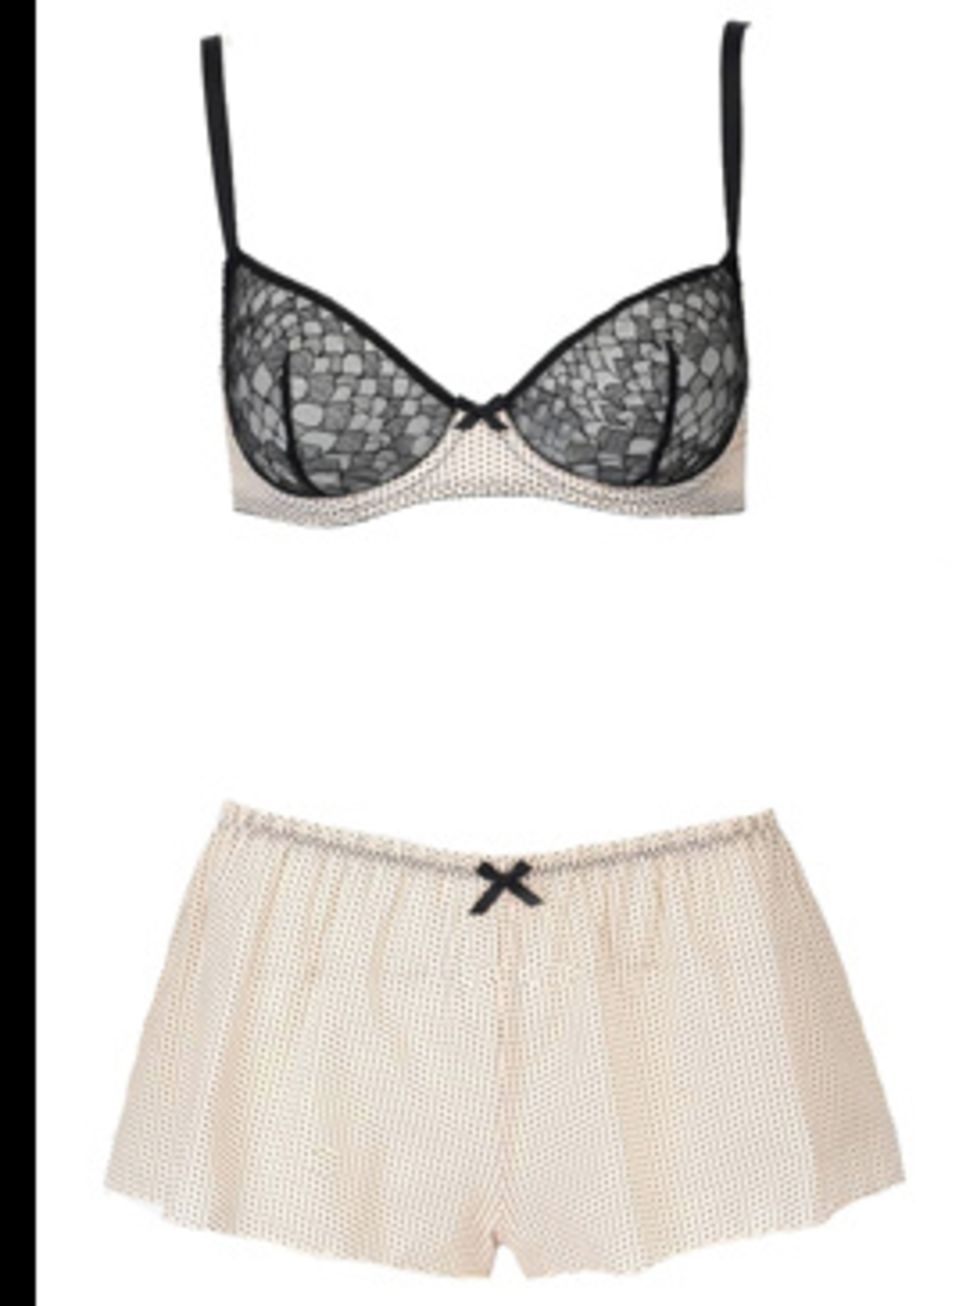 <p>Polka dot bra £89, and polka dots panty £52, by <a href="http://www.wolfordboutiquelondon.com">Wolford</a></p>